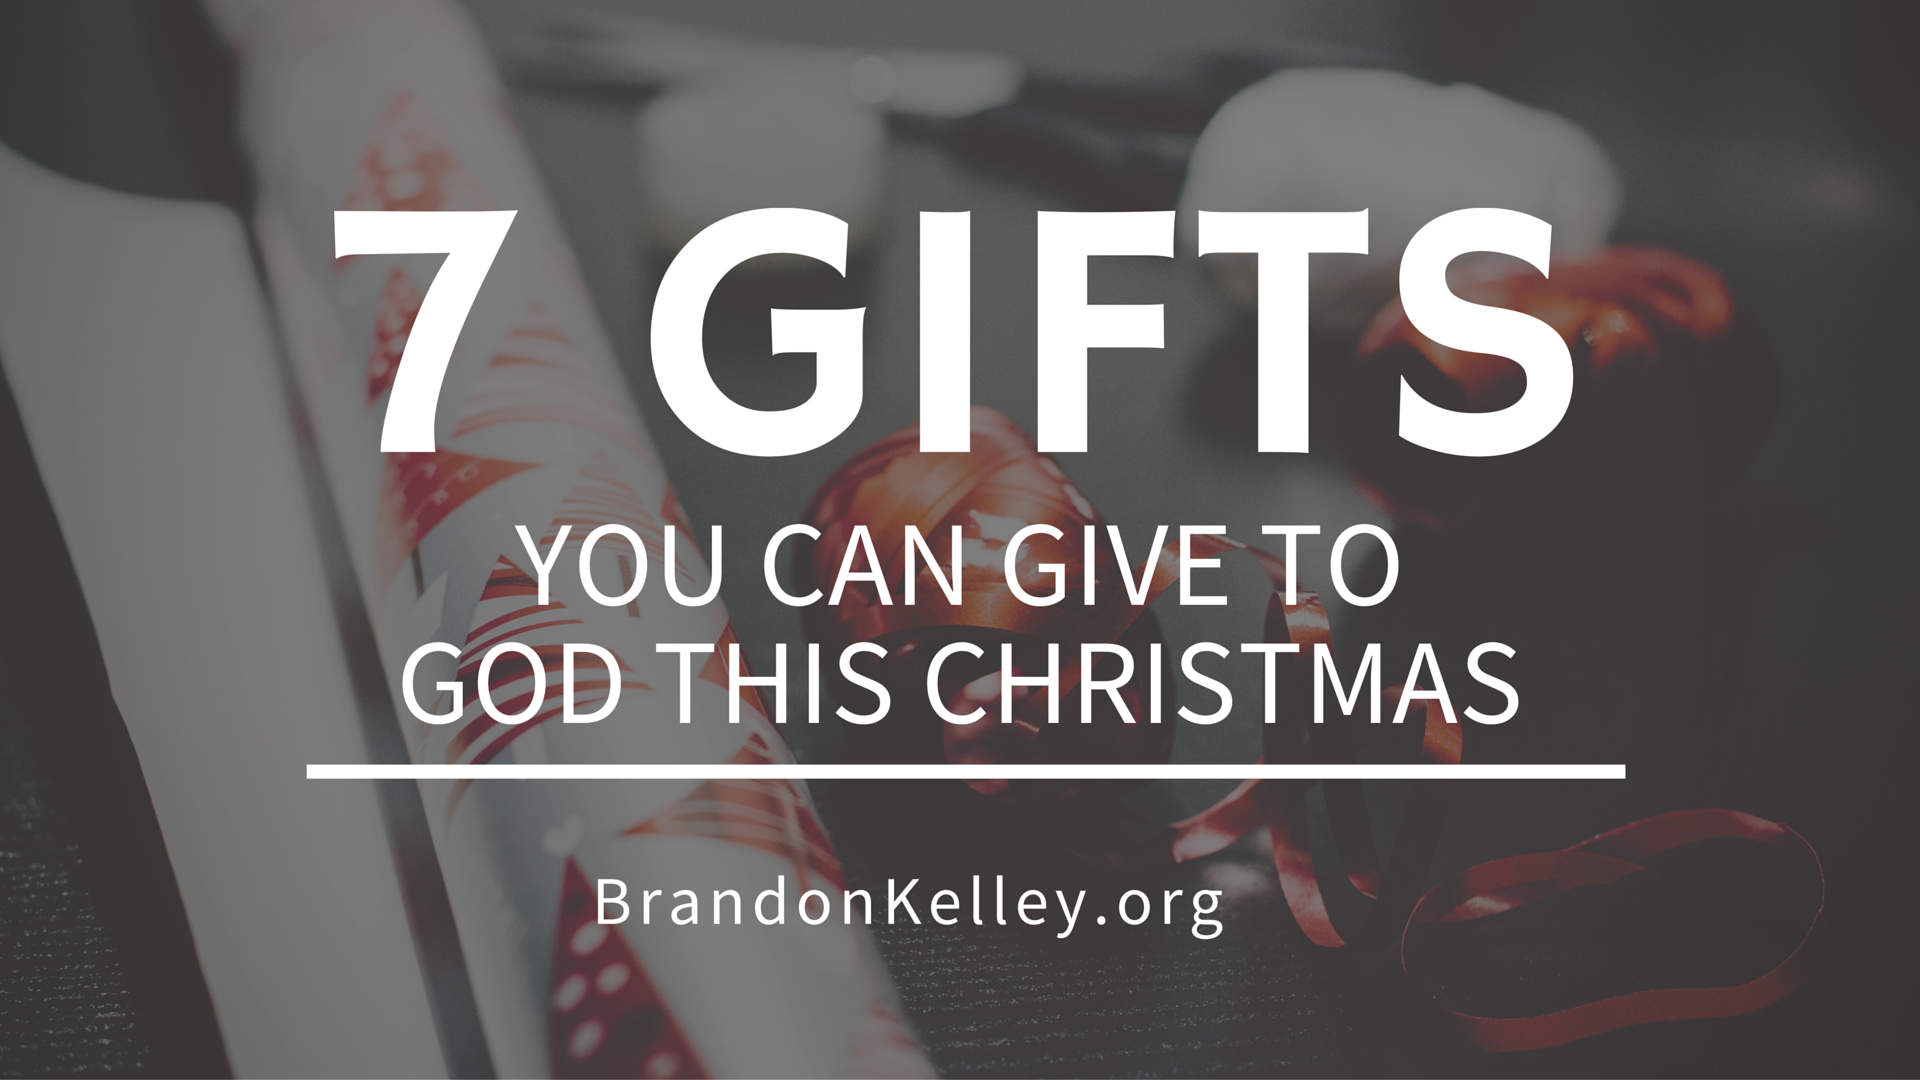 7 Gifts You Can Give to God This Christmas